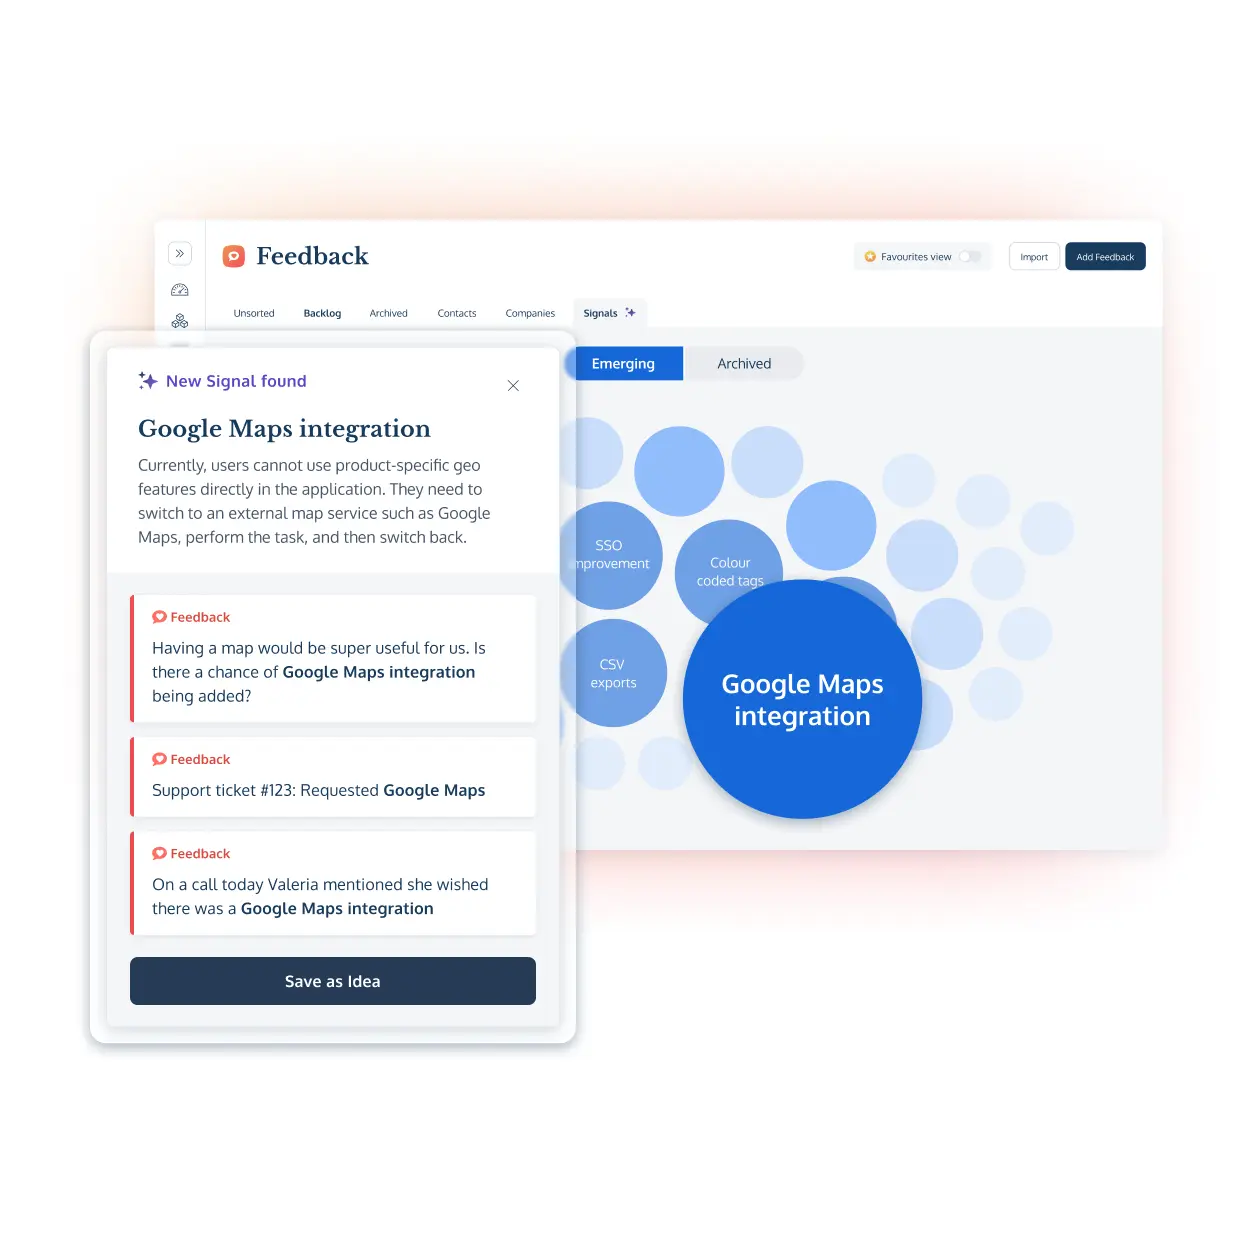 Customer feedback AI theme analysis in ProdPad product management software